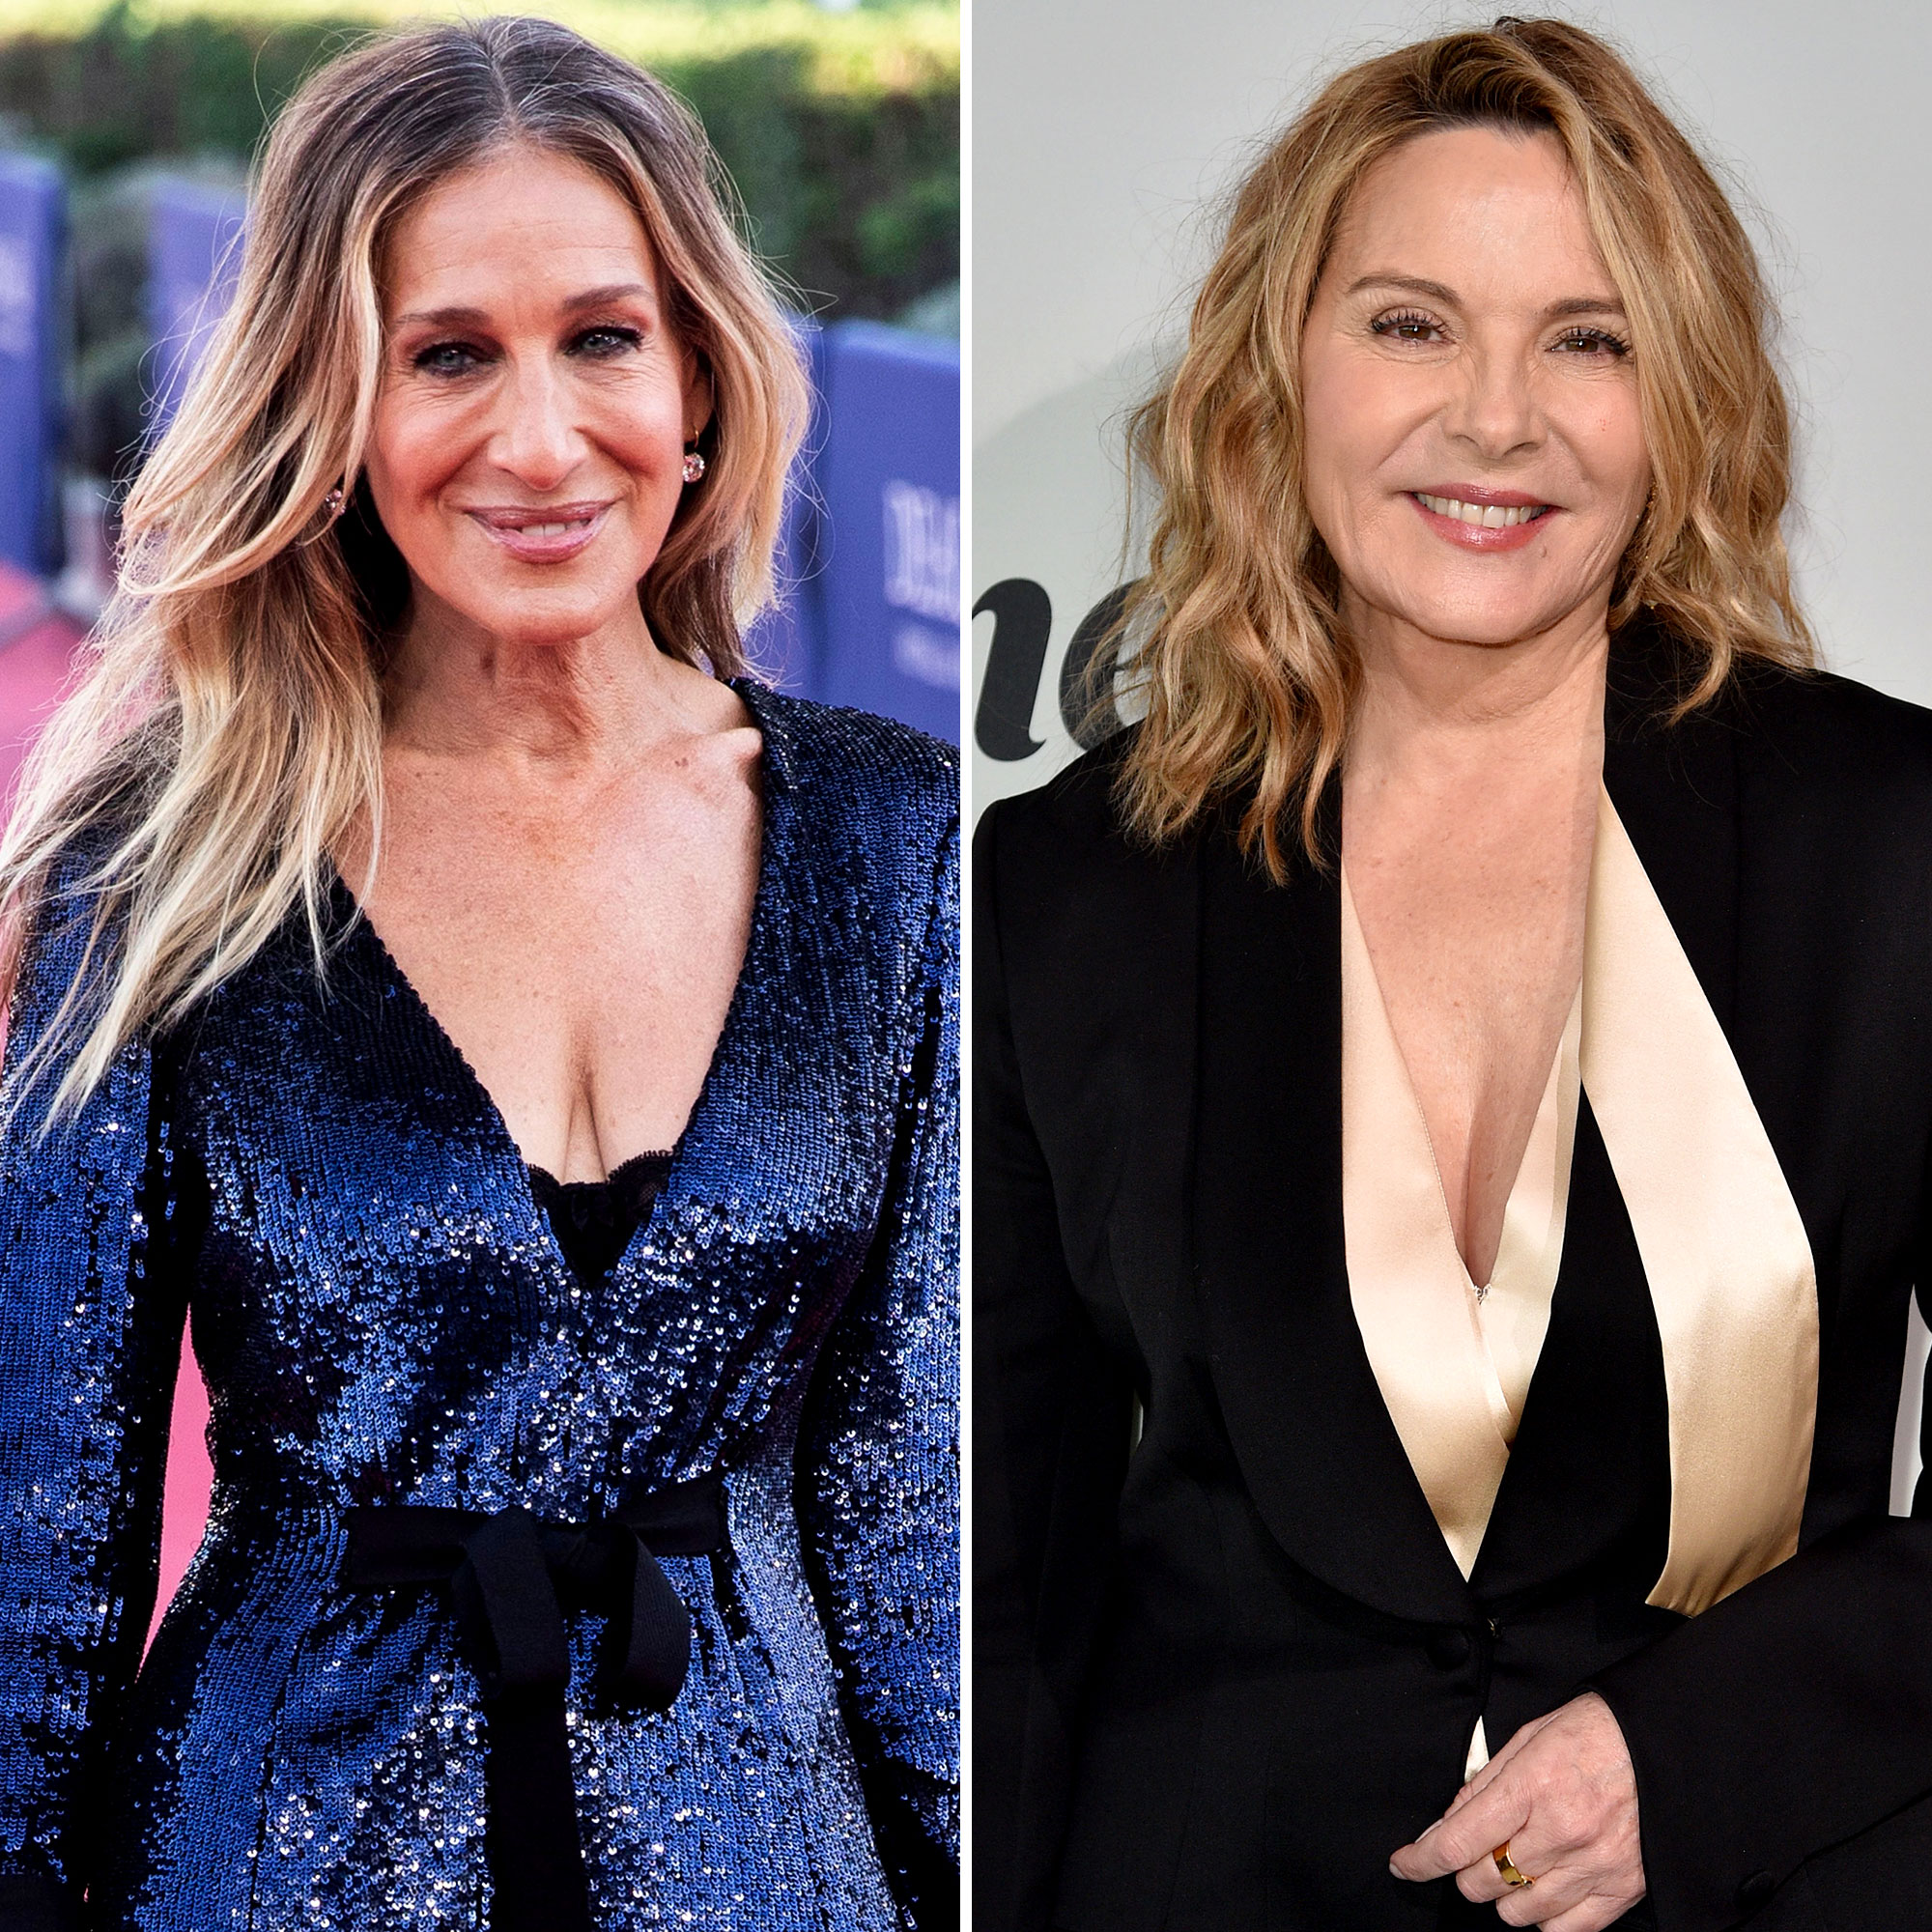 Sarah Jessica Parker Gets Real About Very Painful Kim Cattrall Drama